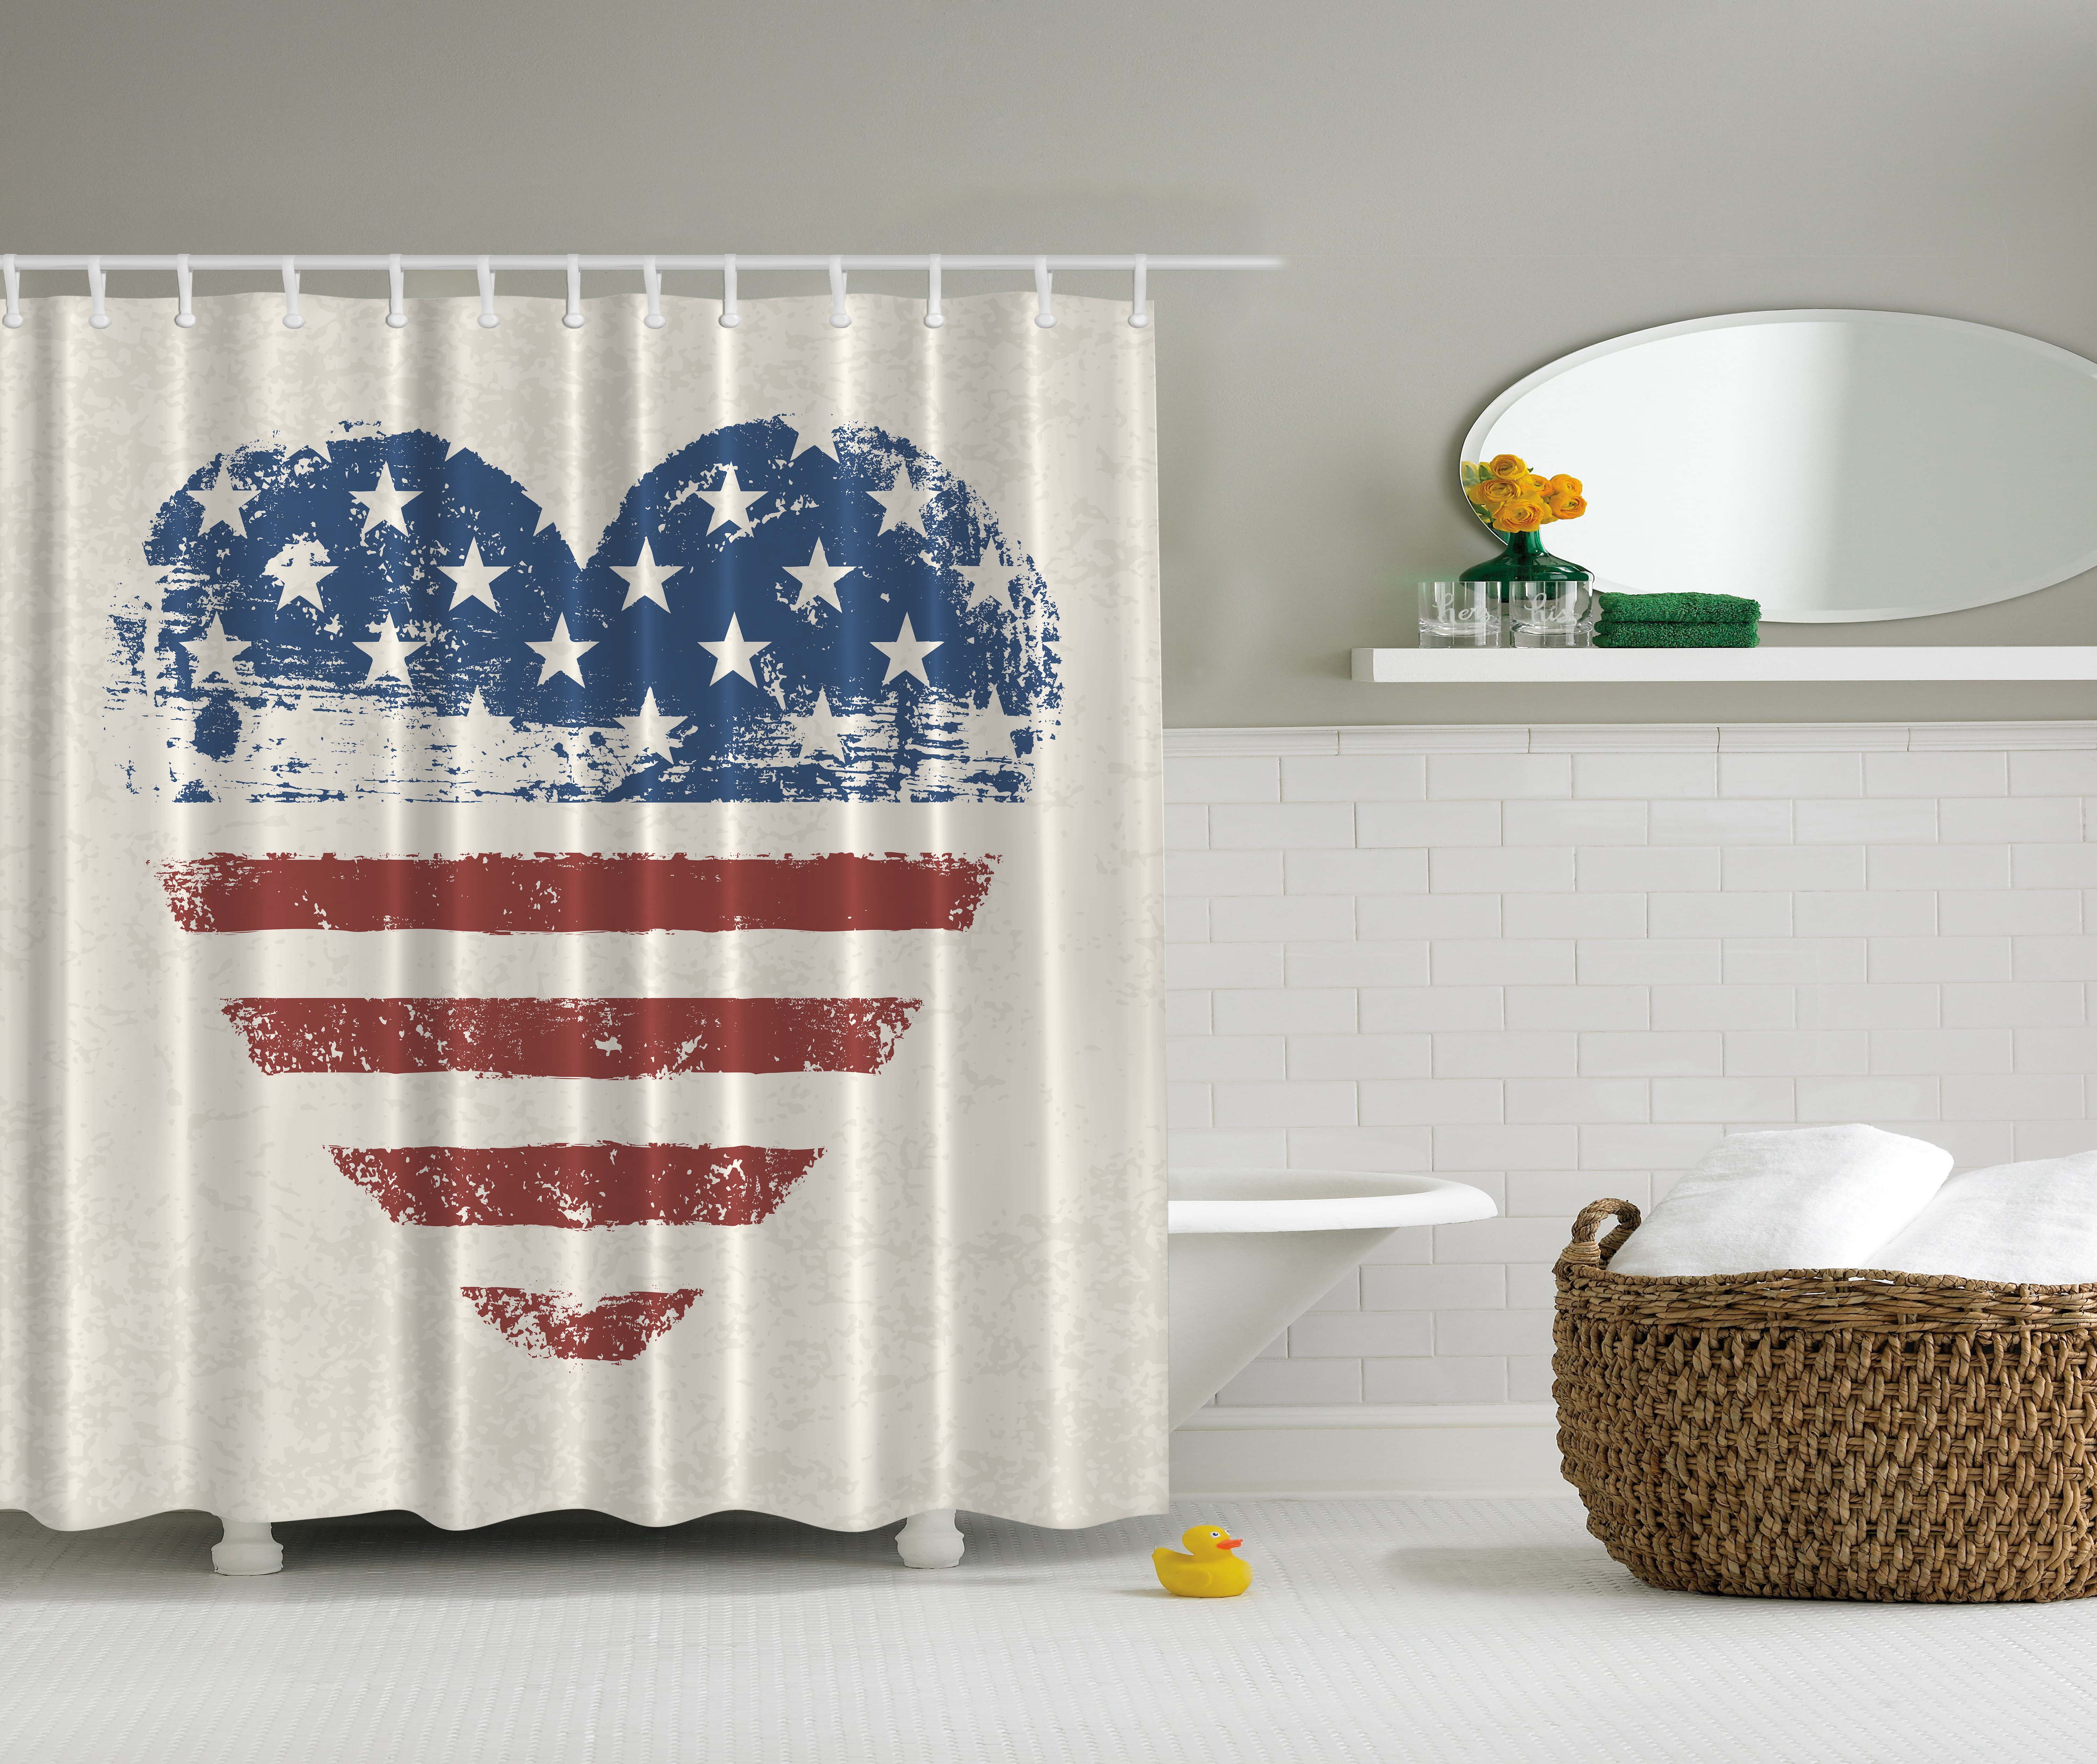 Fireworks in Front of America Flag Shower Curtain Set Patriotic Bathroom 72X72" 